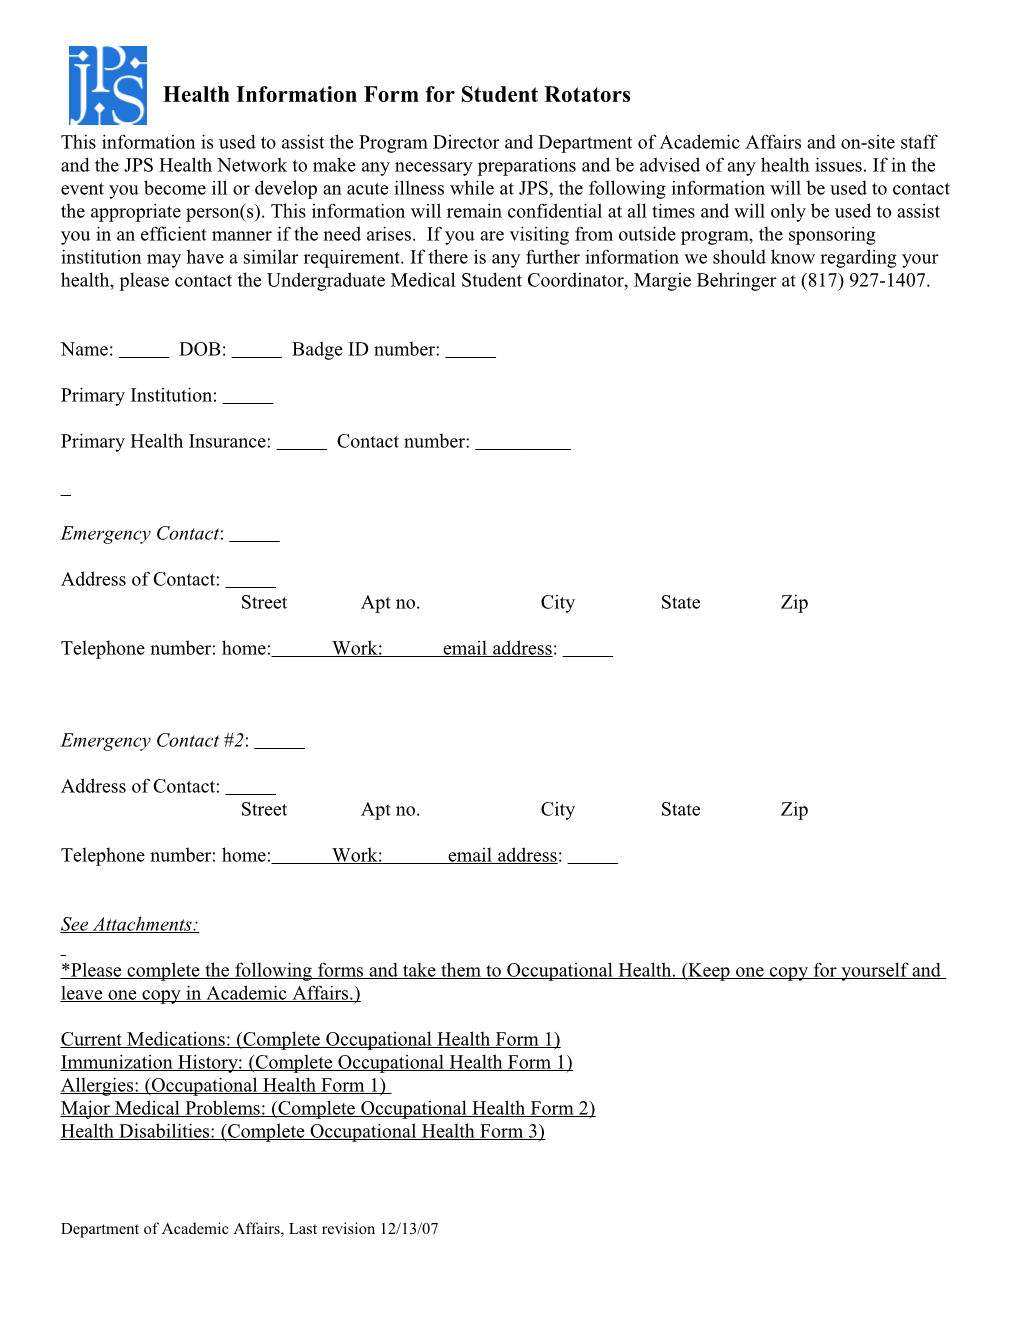 Health Information Form for Student Rotators